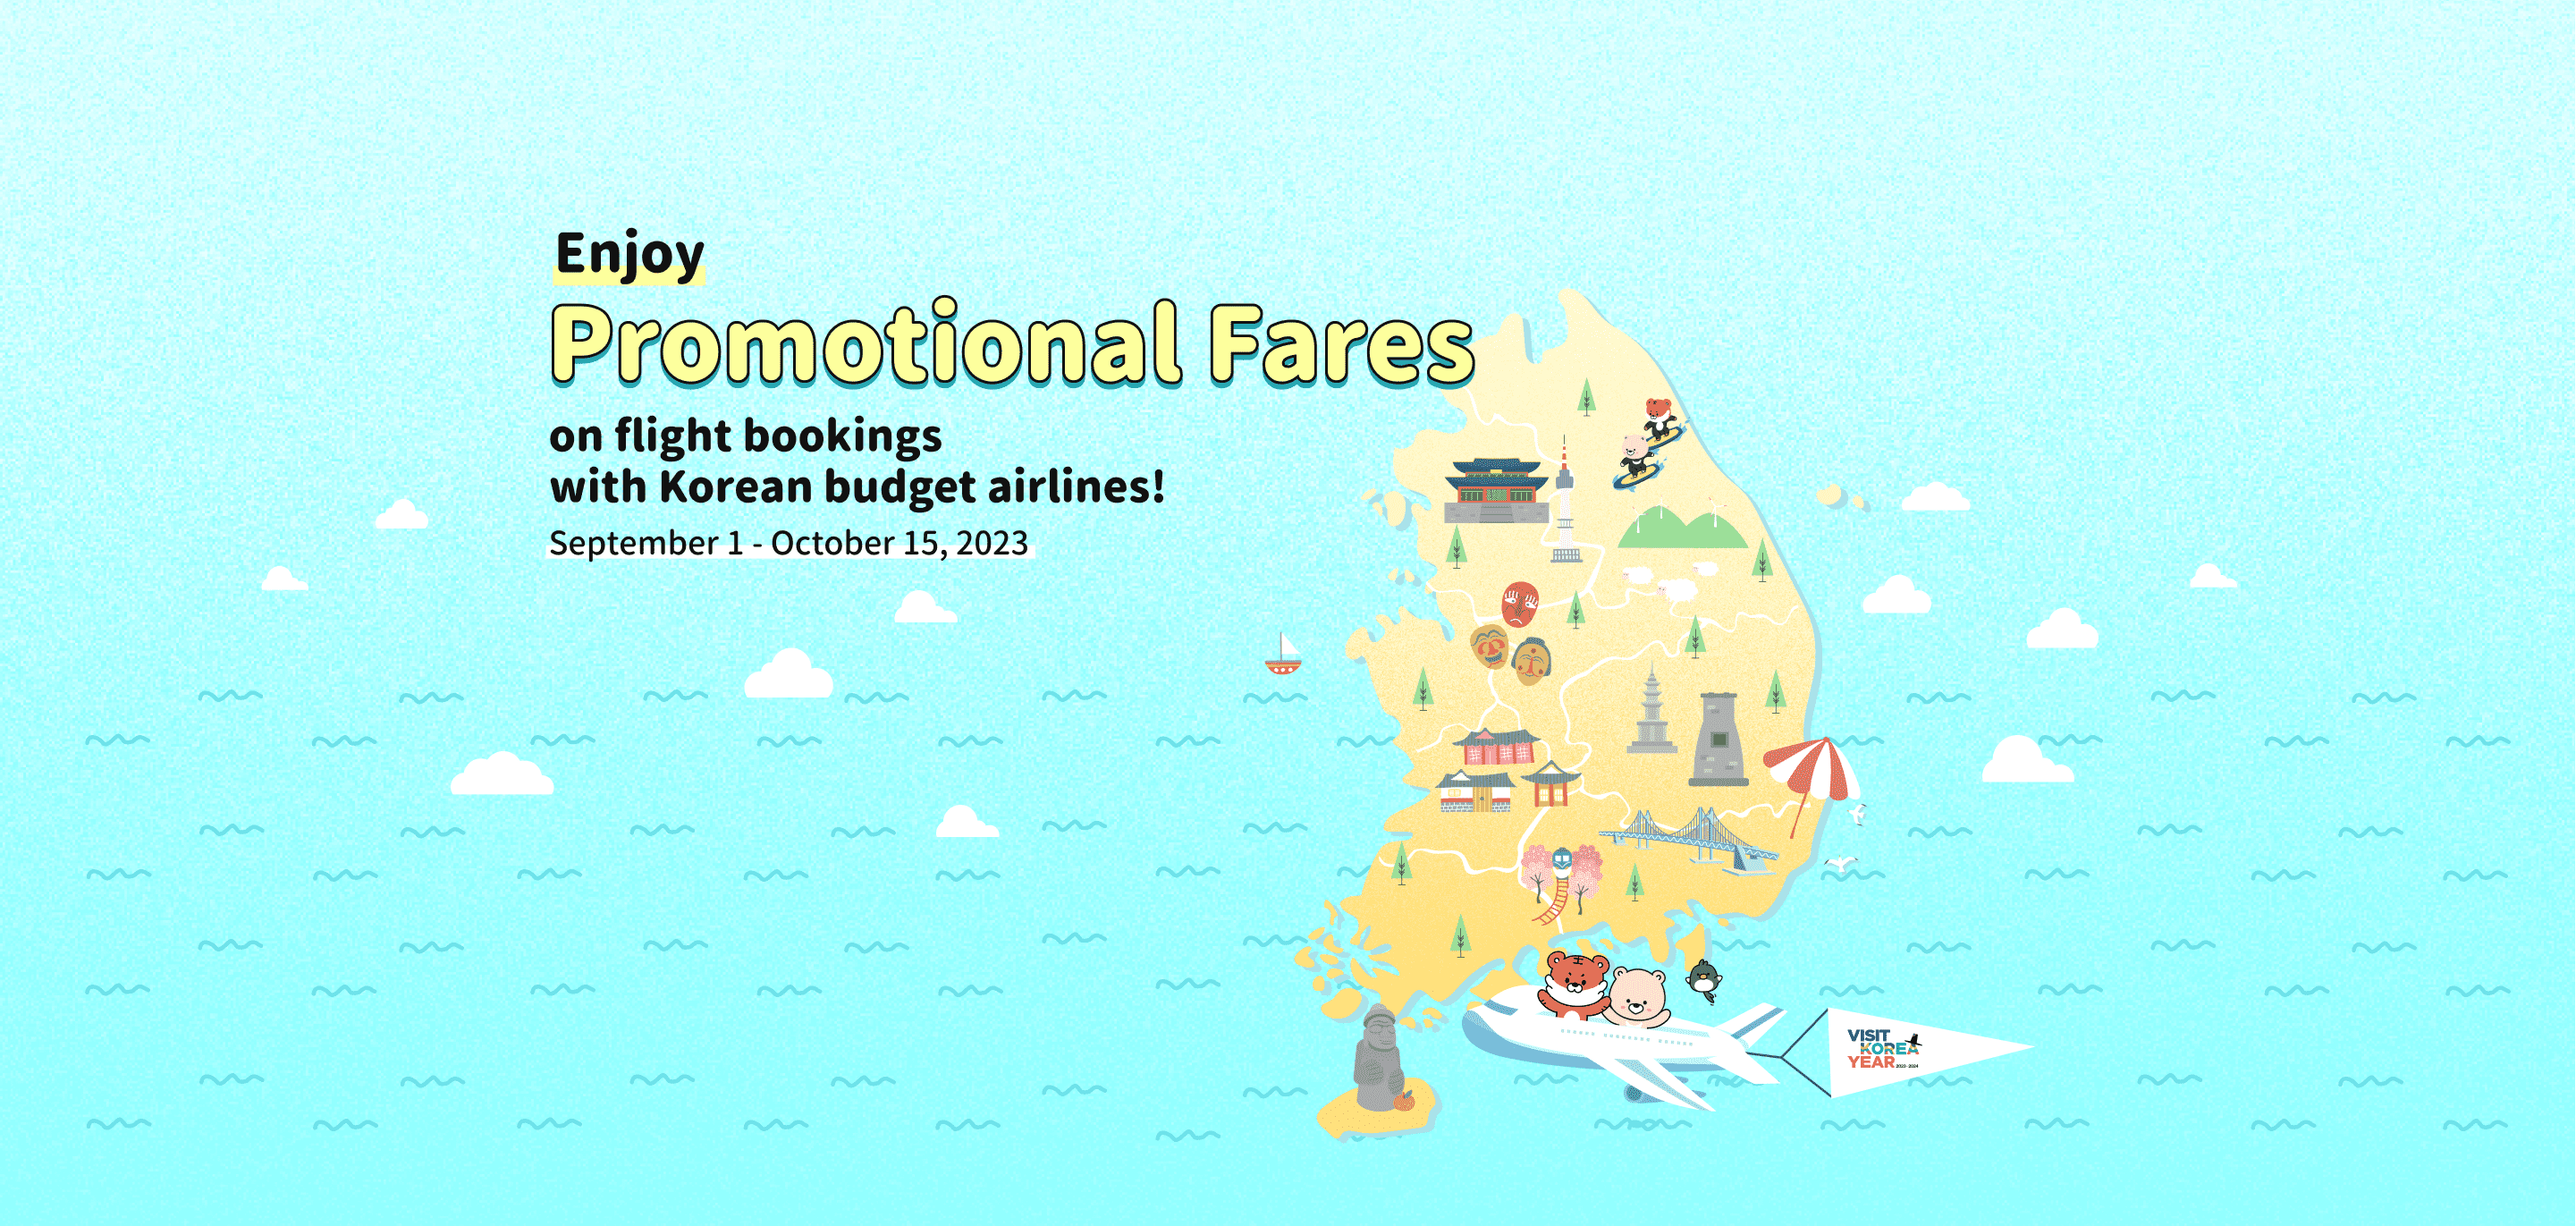 Enjoy Promotional Fares on flight bookings with Korean budget airlines!